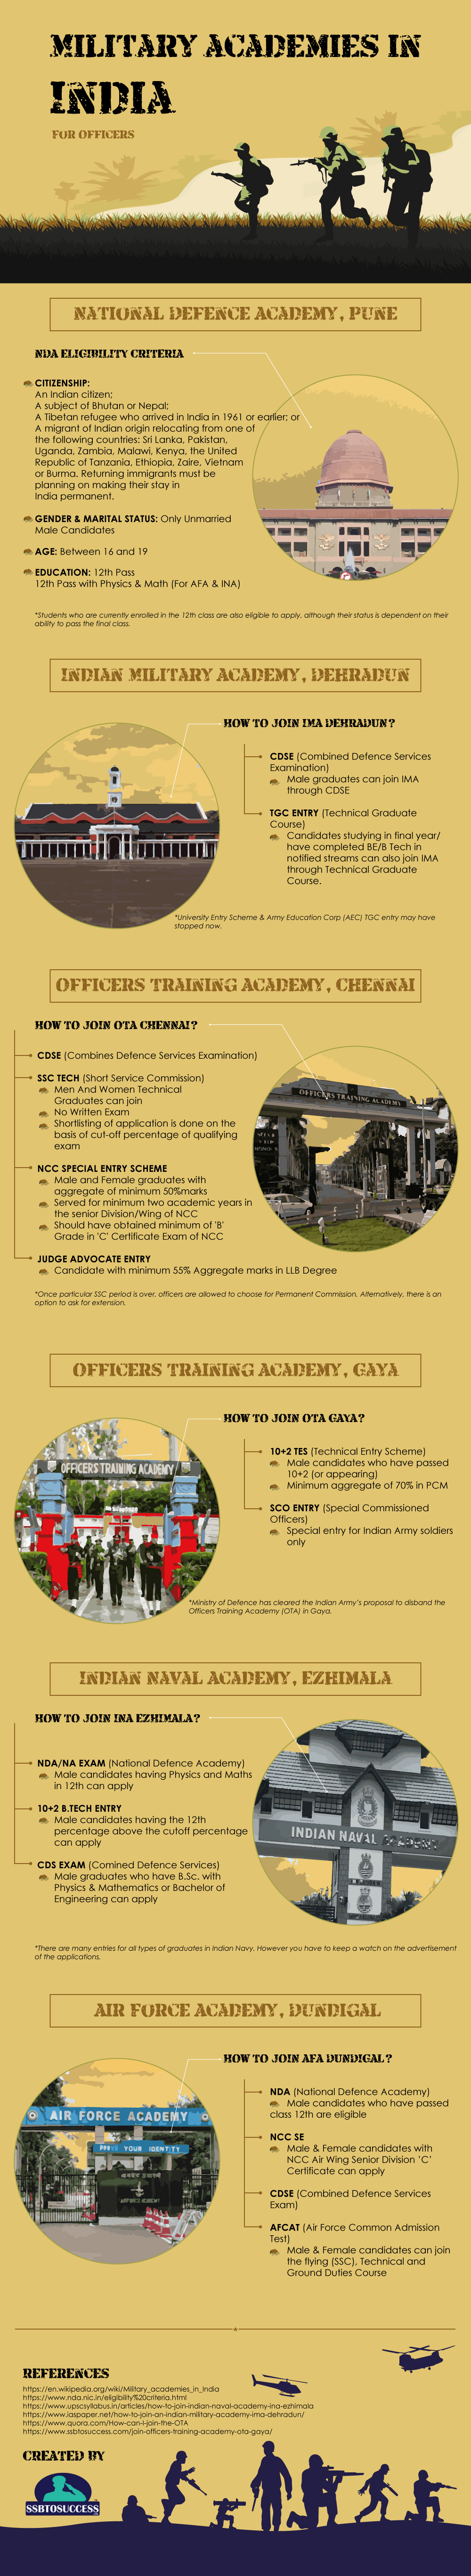 military-academies-in-india-for-officers-infographic-ssbtosuccess